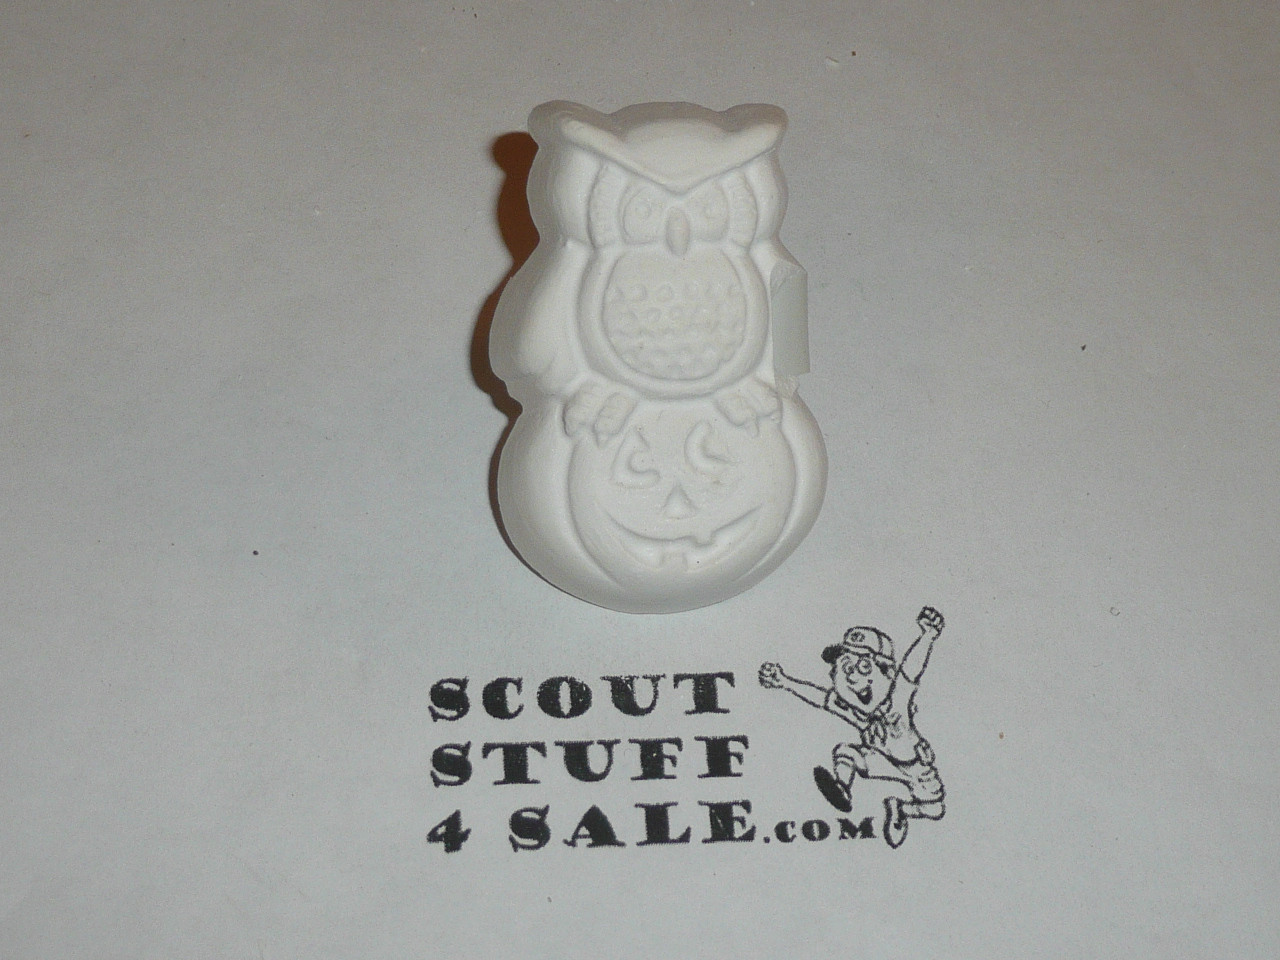 Pumpkin with Owl Plaster Neckerchief Slide, unpainted, Great for Cub or Boy Scout Project